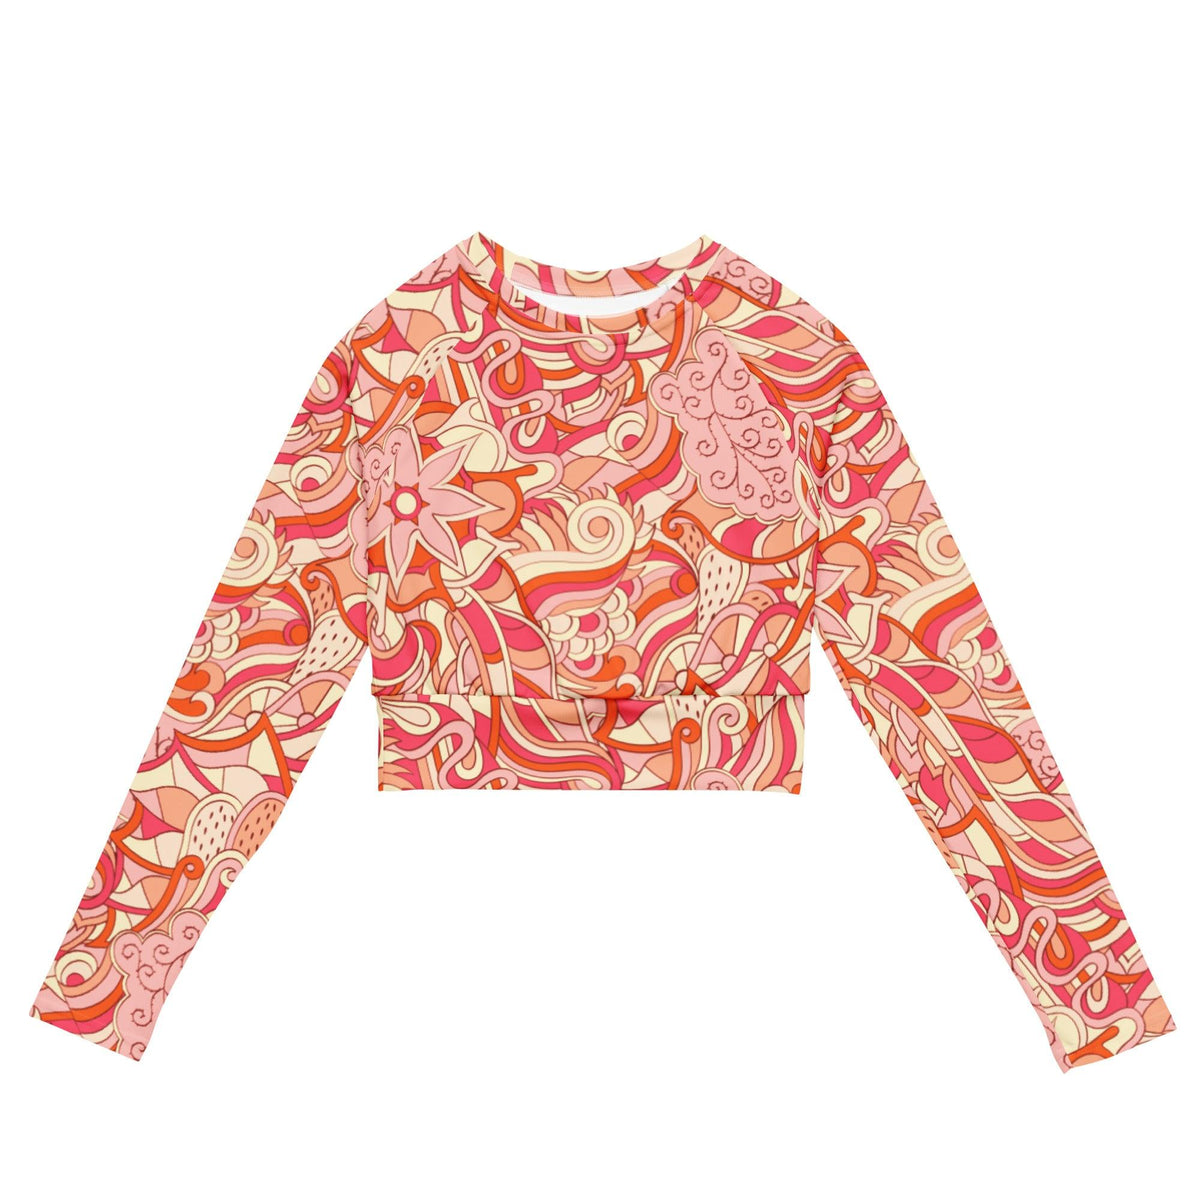 Keki Active Long Sleeve Crop Top - Abstract Paisley & Floral Print - Activewear Retro Psychedelic Pink Orange - All Over Print - Gym - Workout - Athleisure - Vibrant - Plus Size - Coordinates